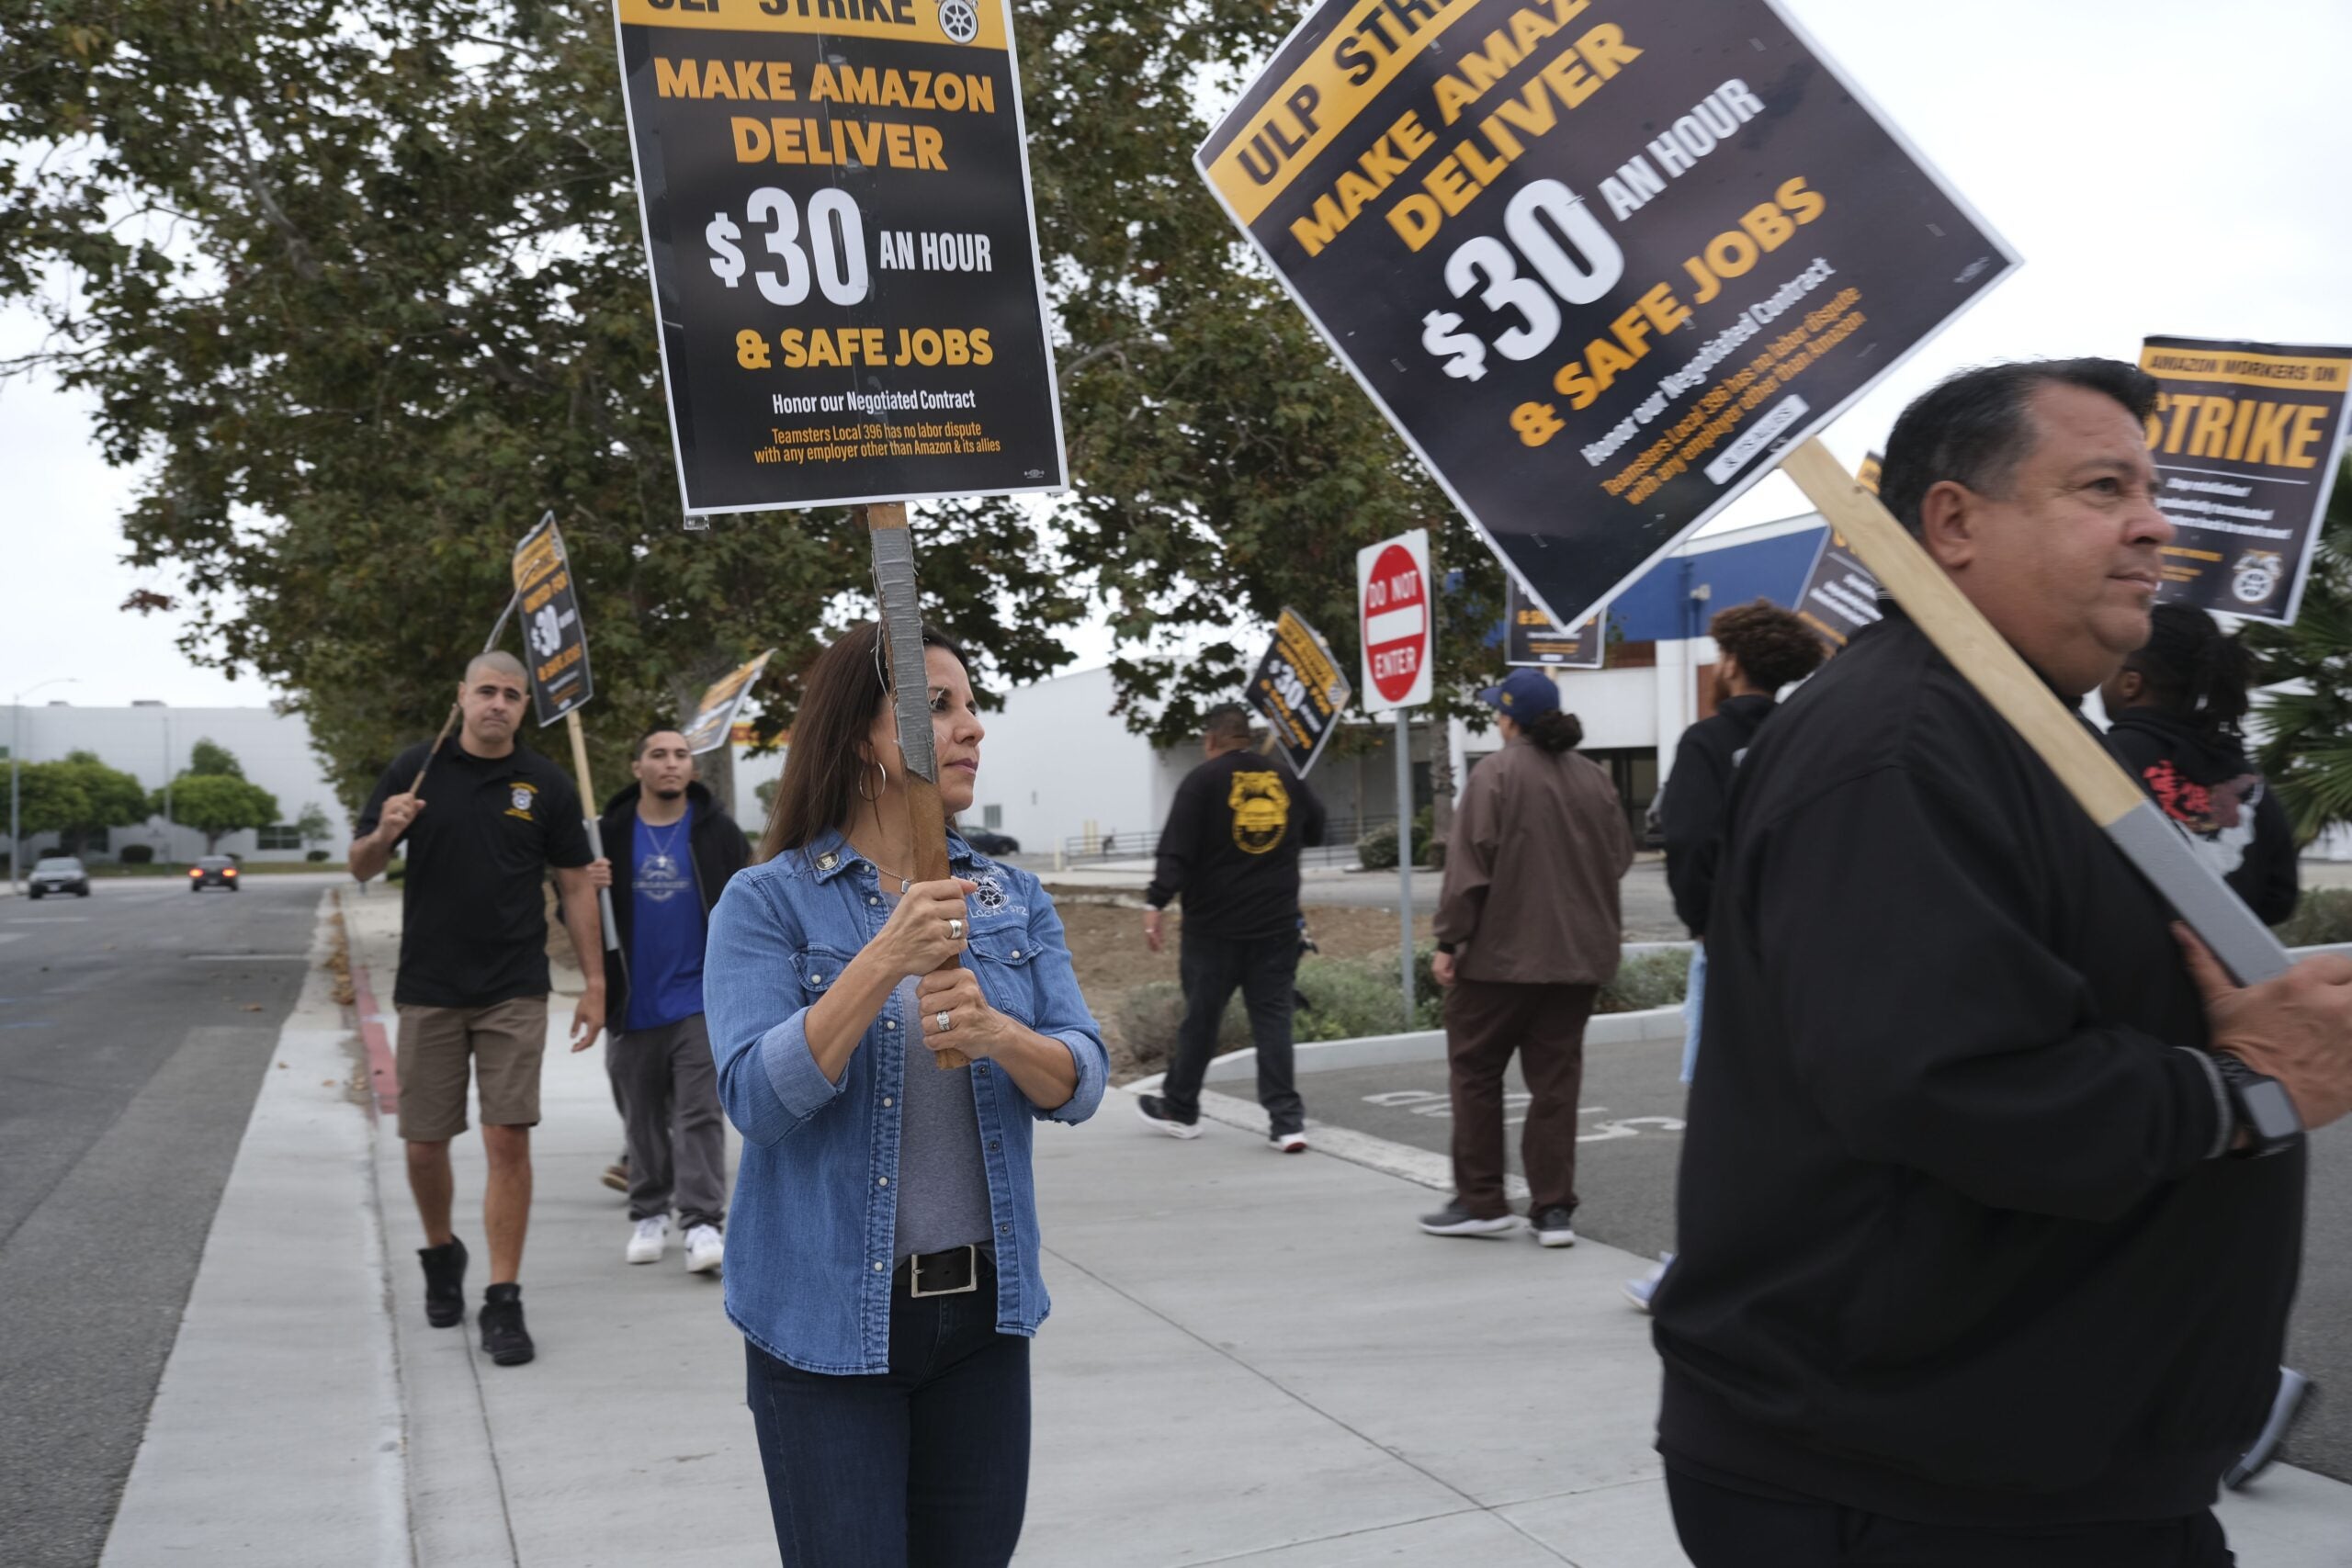 amazon-teamsters-picket-two-l-a-warehouses-over-unfair-labor-practices